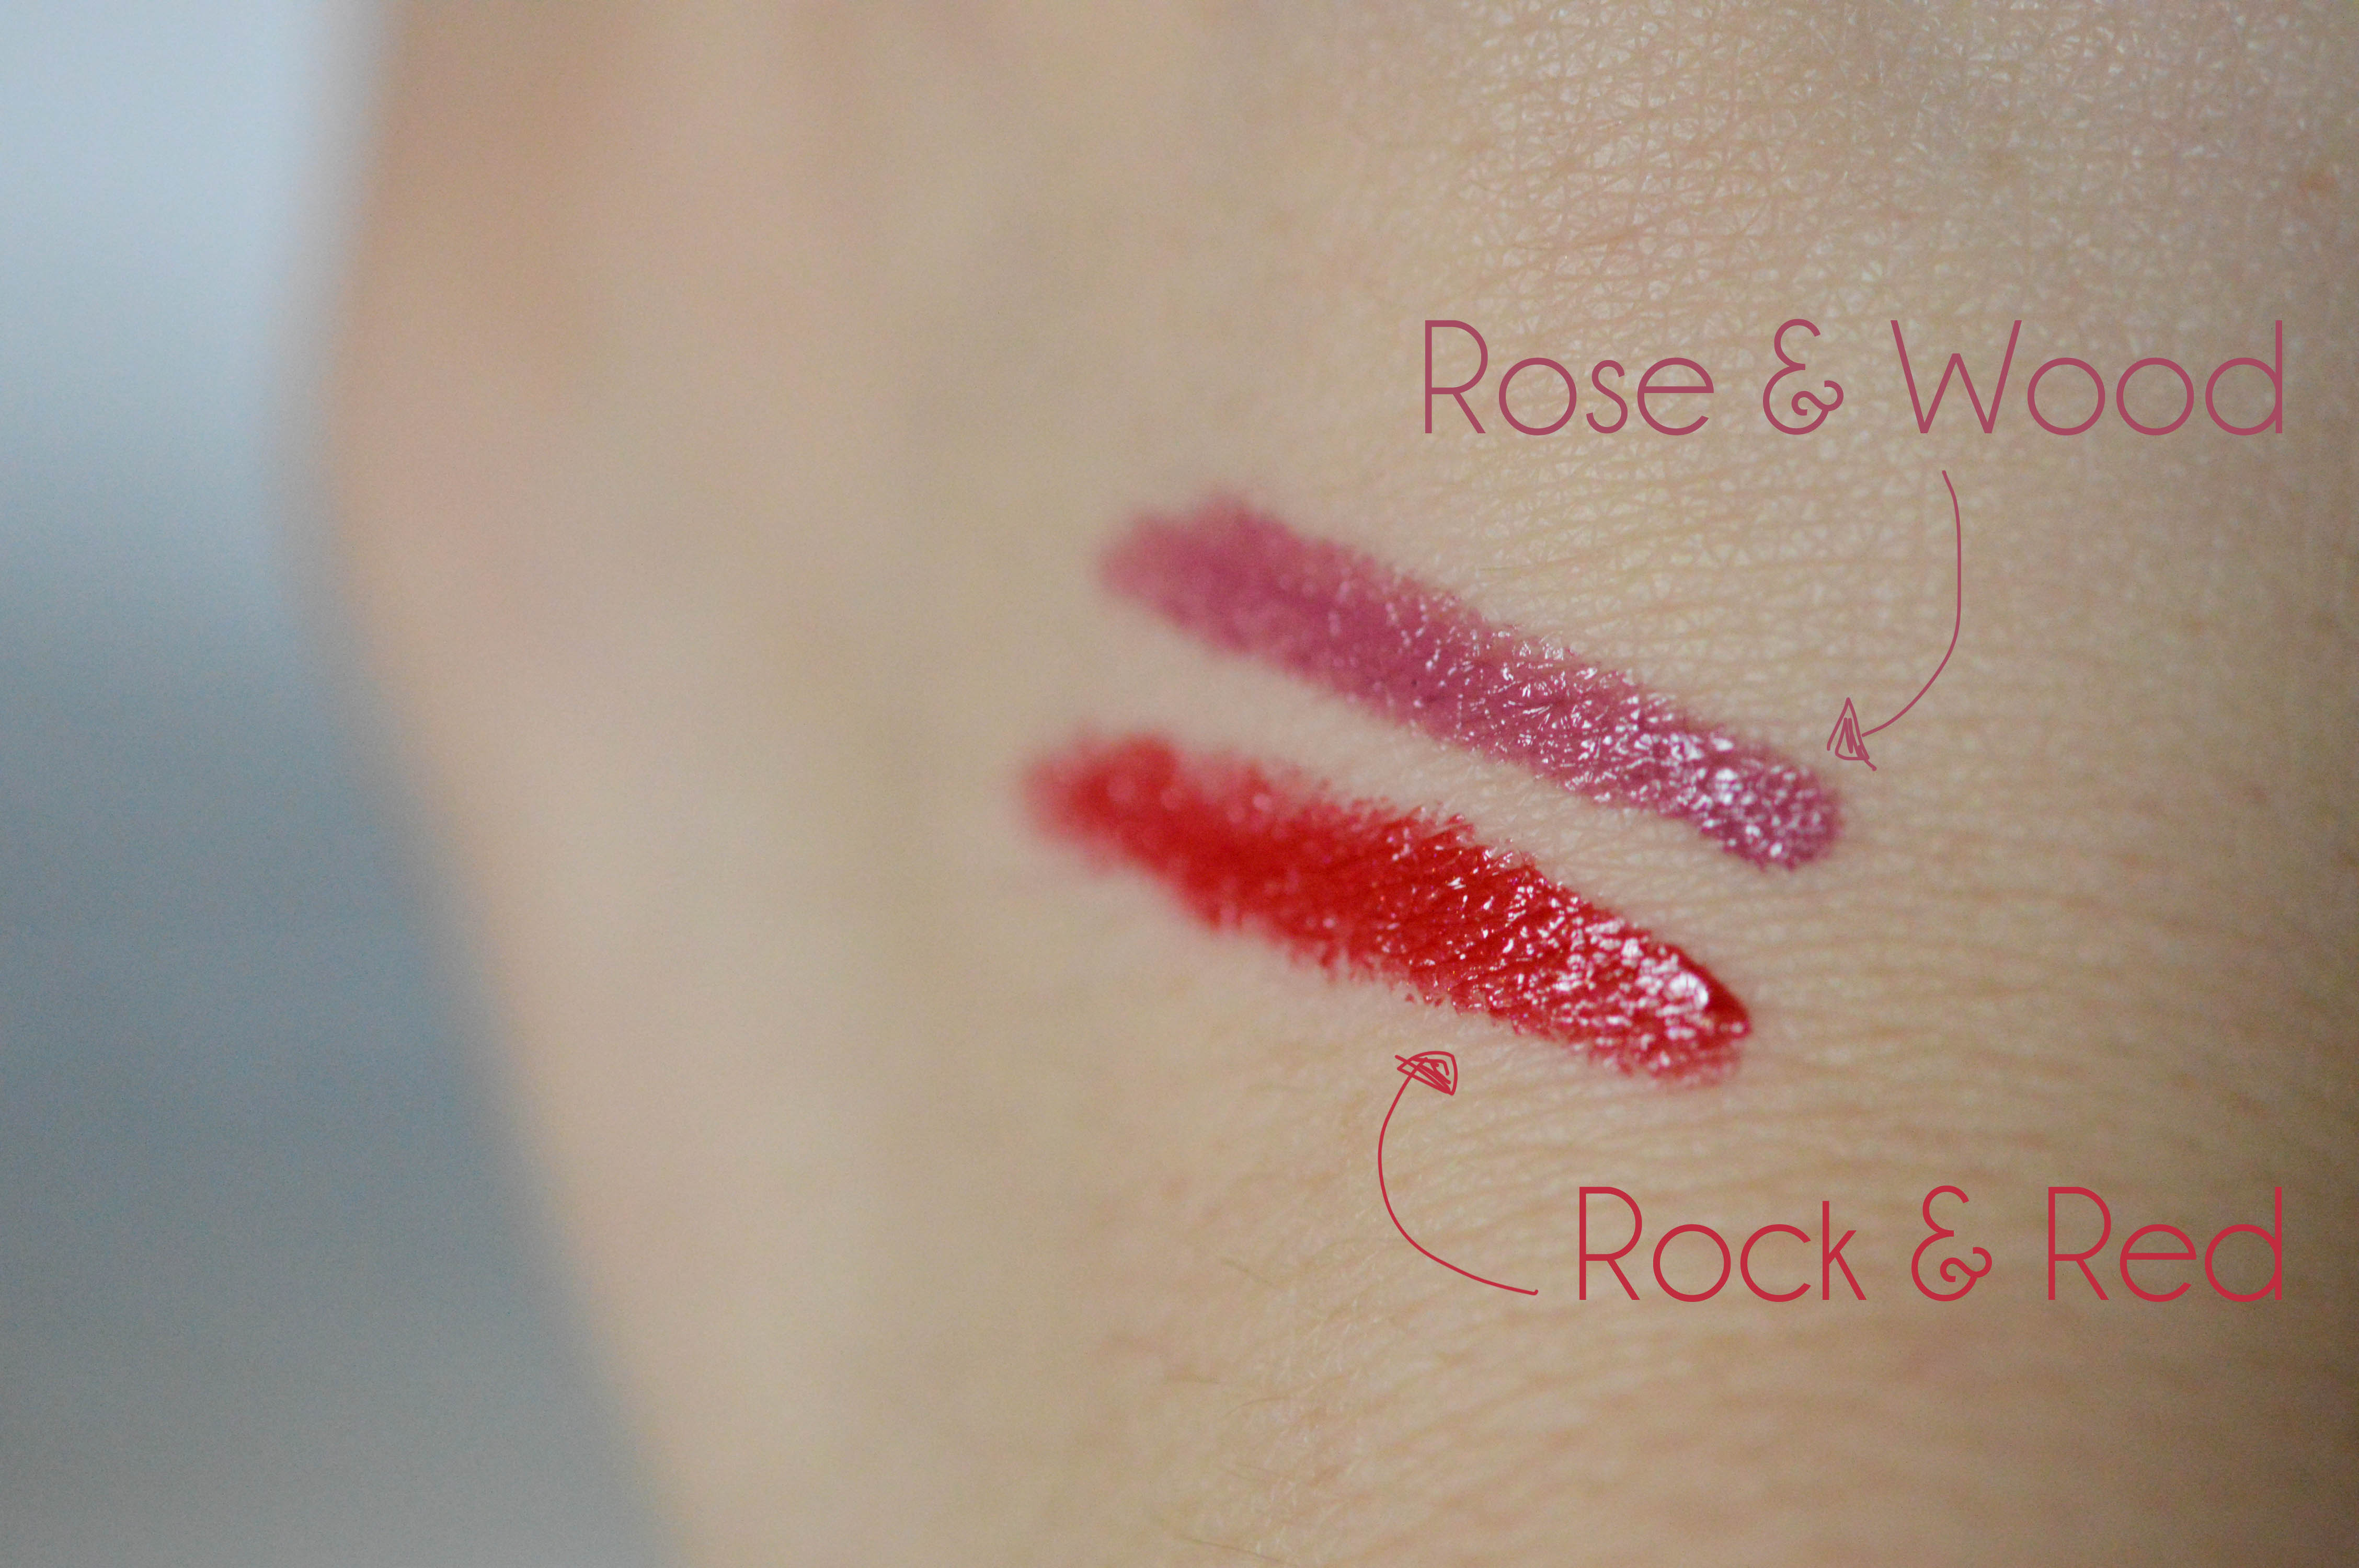 ALITTLEB_BLOG_BEAUTE_RESERVE_NATURELLE_LIP_AND_KISS_ROSE_AND_WOOD_ROCK_AND_RED_SWATCH